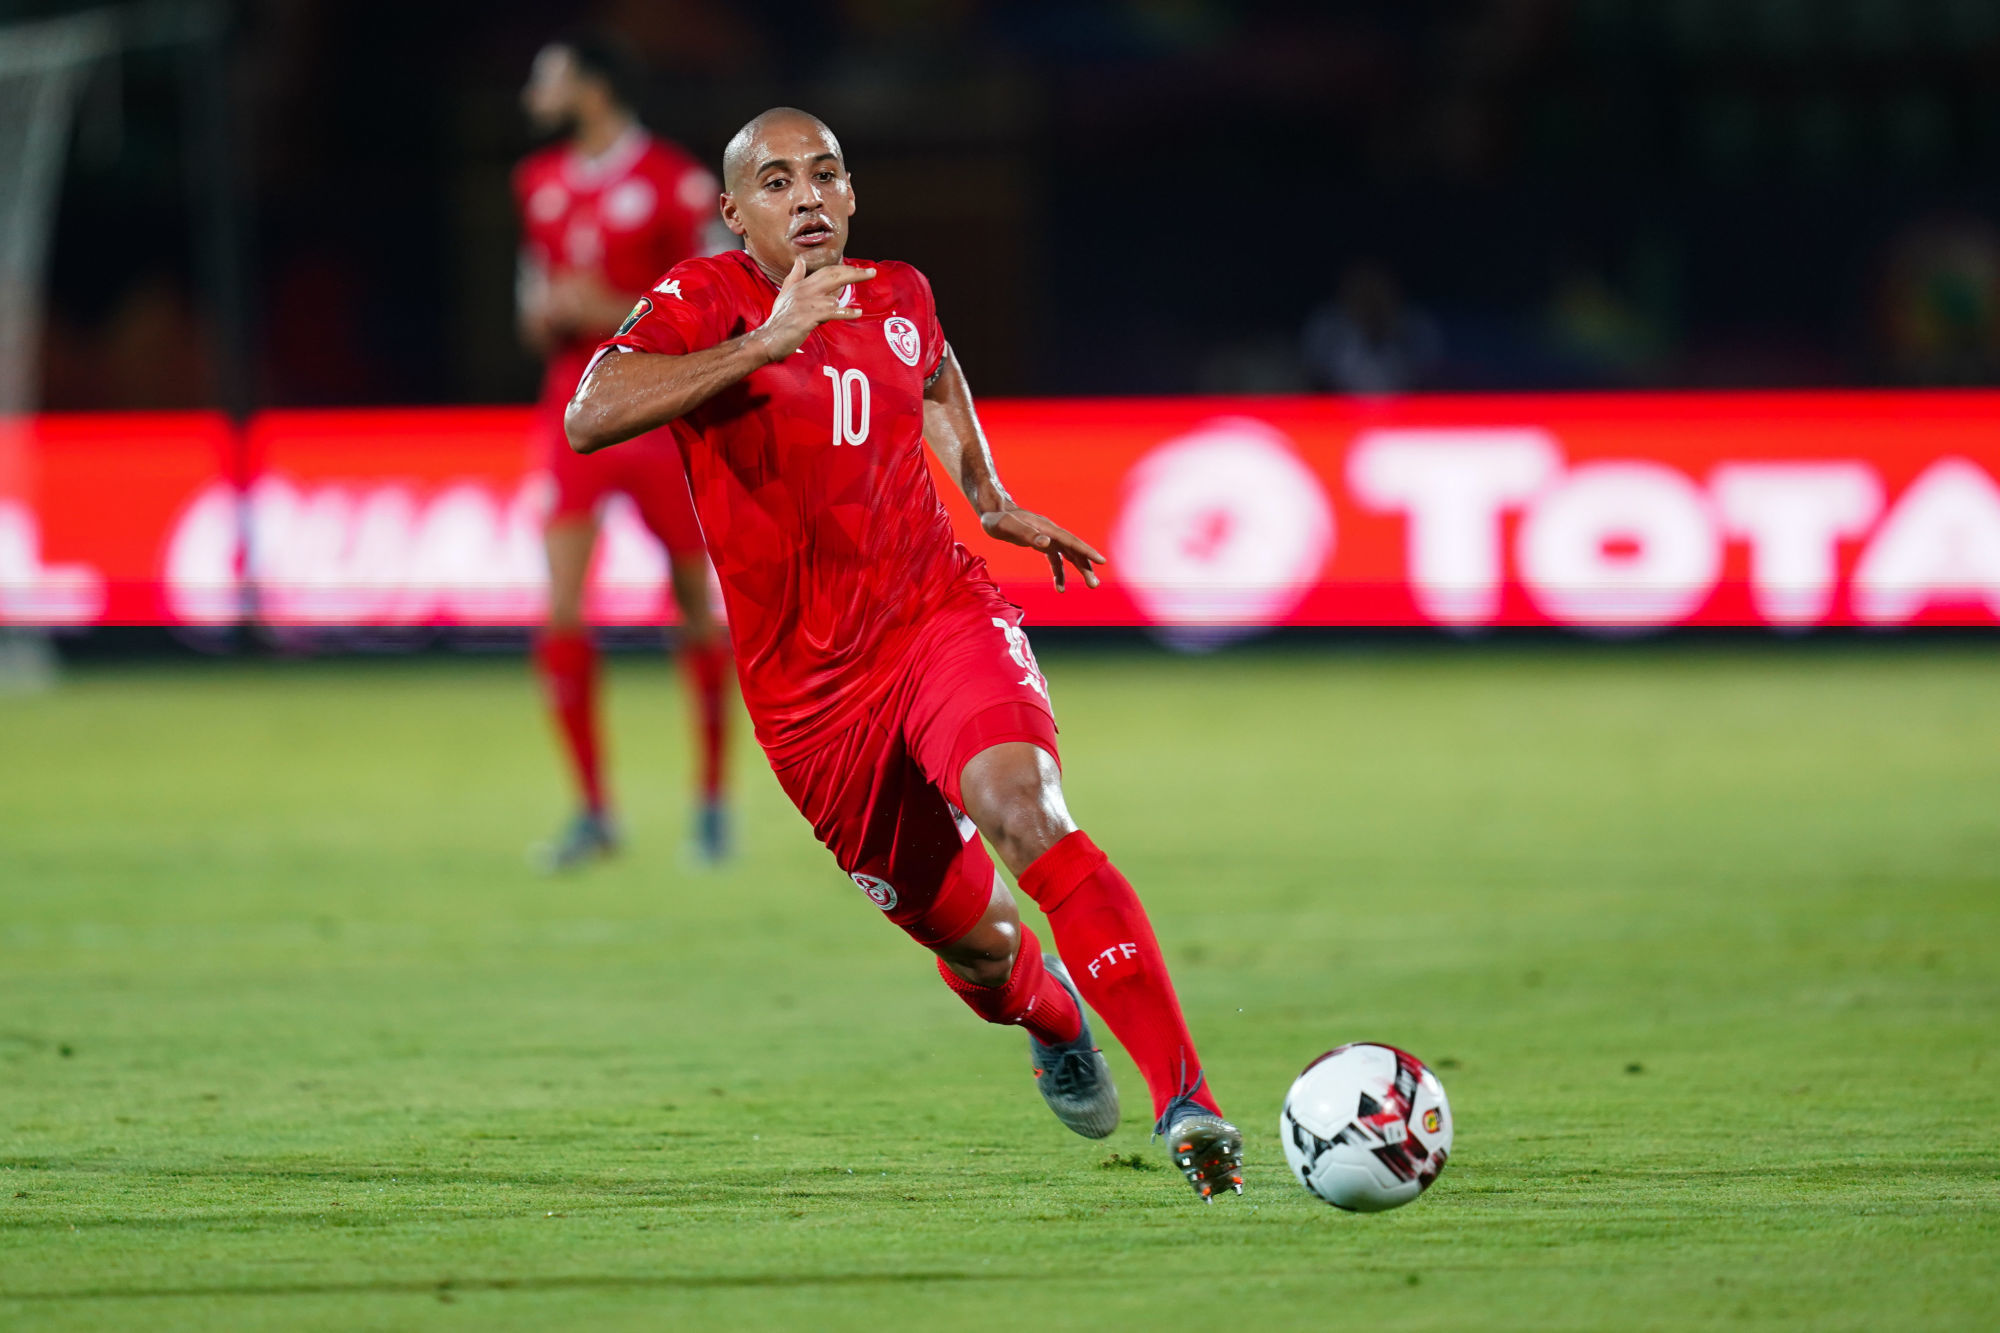 Wahbi Khazri of Tunisia during the 2019 Africa Cup of Nations third place final soccer match between Tunisia and Nigeria at the Al-Salam Stadium on 17th July 2019 Photo : Ulrik Pedersen / Icon Sport